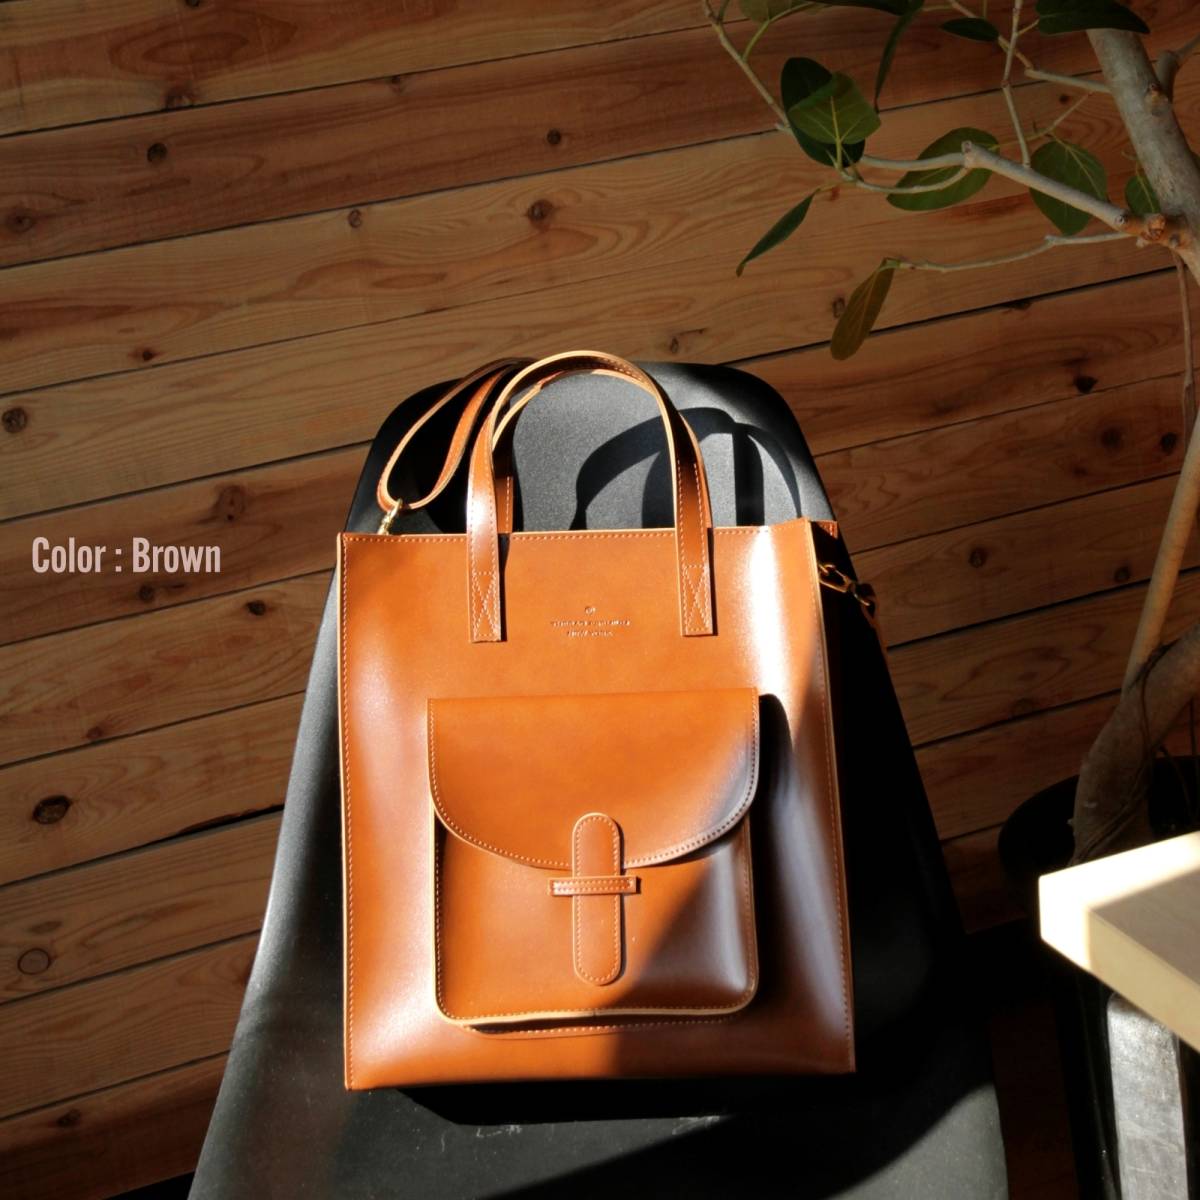 [ new goods ] popular commodity leather shoulder bag A4 square shoulder .. handbag 2way [BROWN]kospa eminent imitation leather easy to use simple join ...